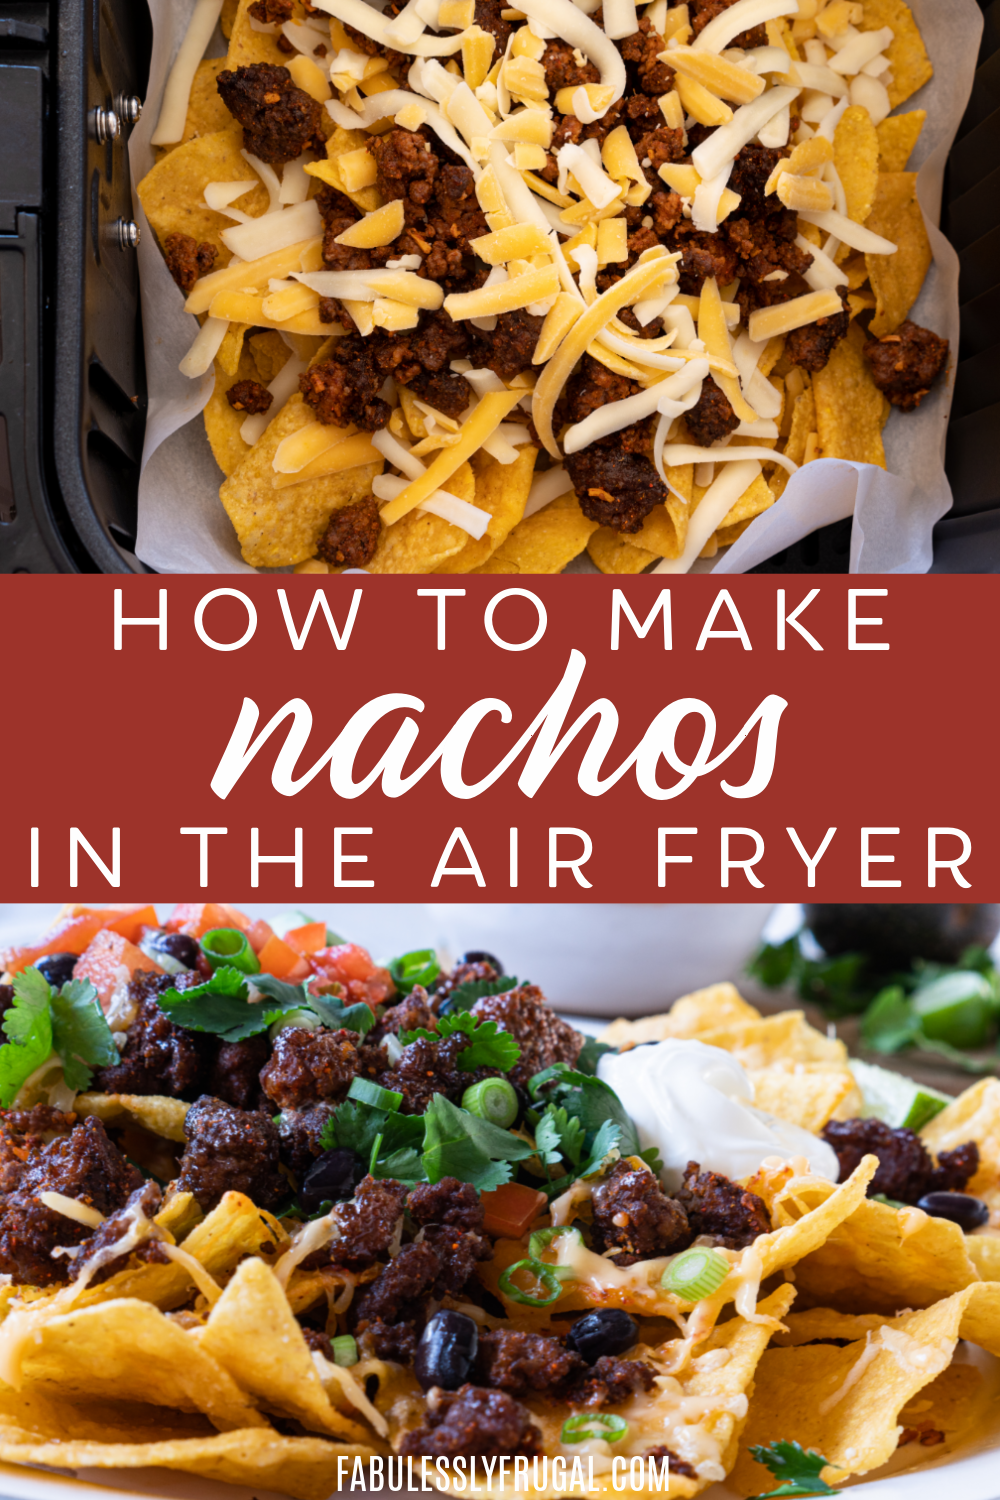 You can make air fryer nachos in just minutes. It is easy and the best snack, lunch, or dinner recipe